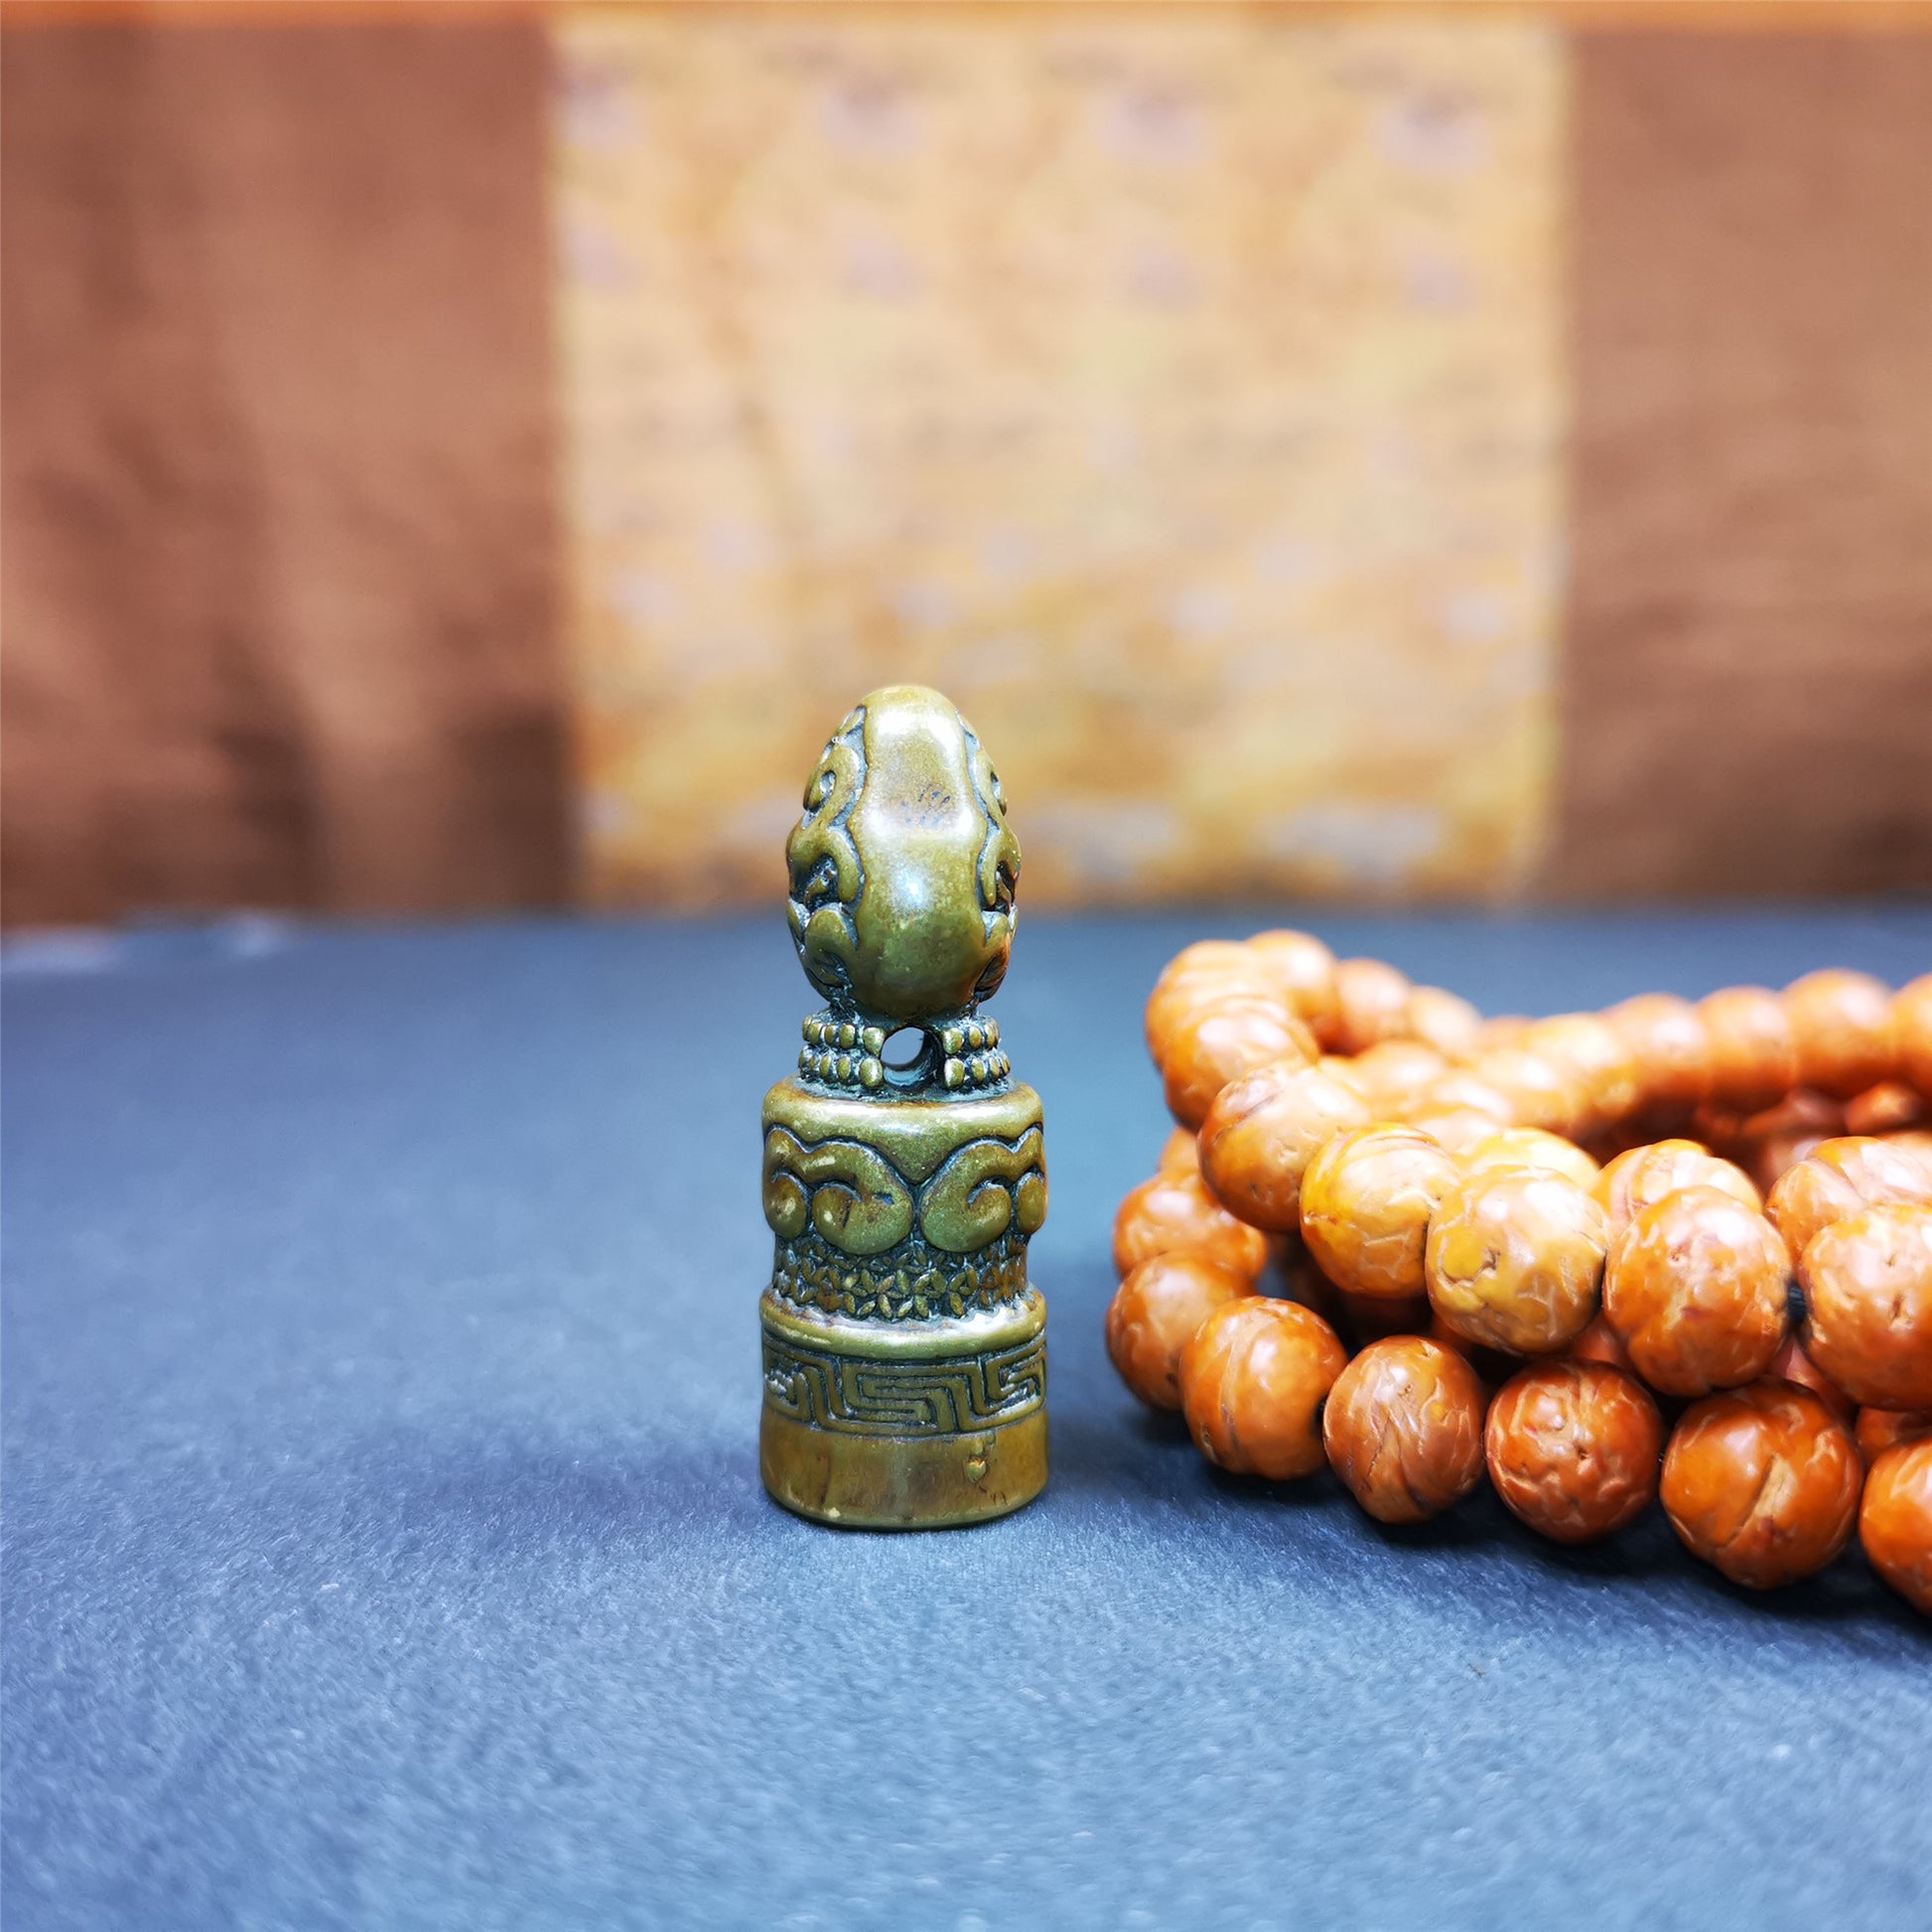 This vintage stamps were handmade from tibet,about 50 years old. It is made of copper,carved snow lion and lucky cloud pattern on the body,the lucky knot symbol seal on the bottom,means good luck and bless.